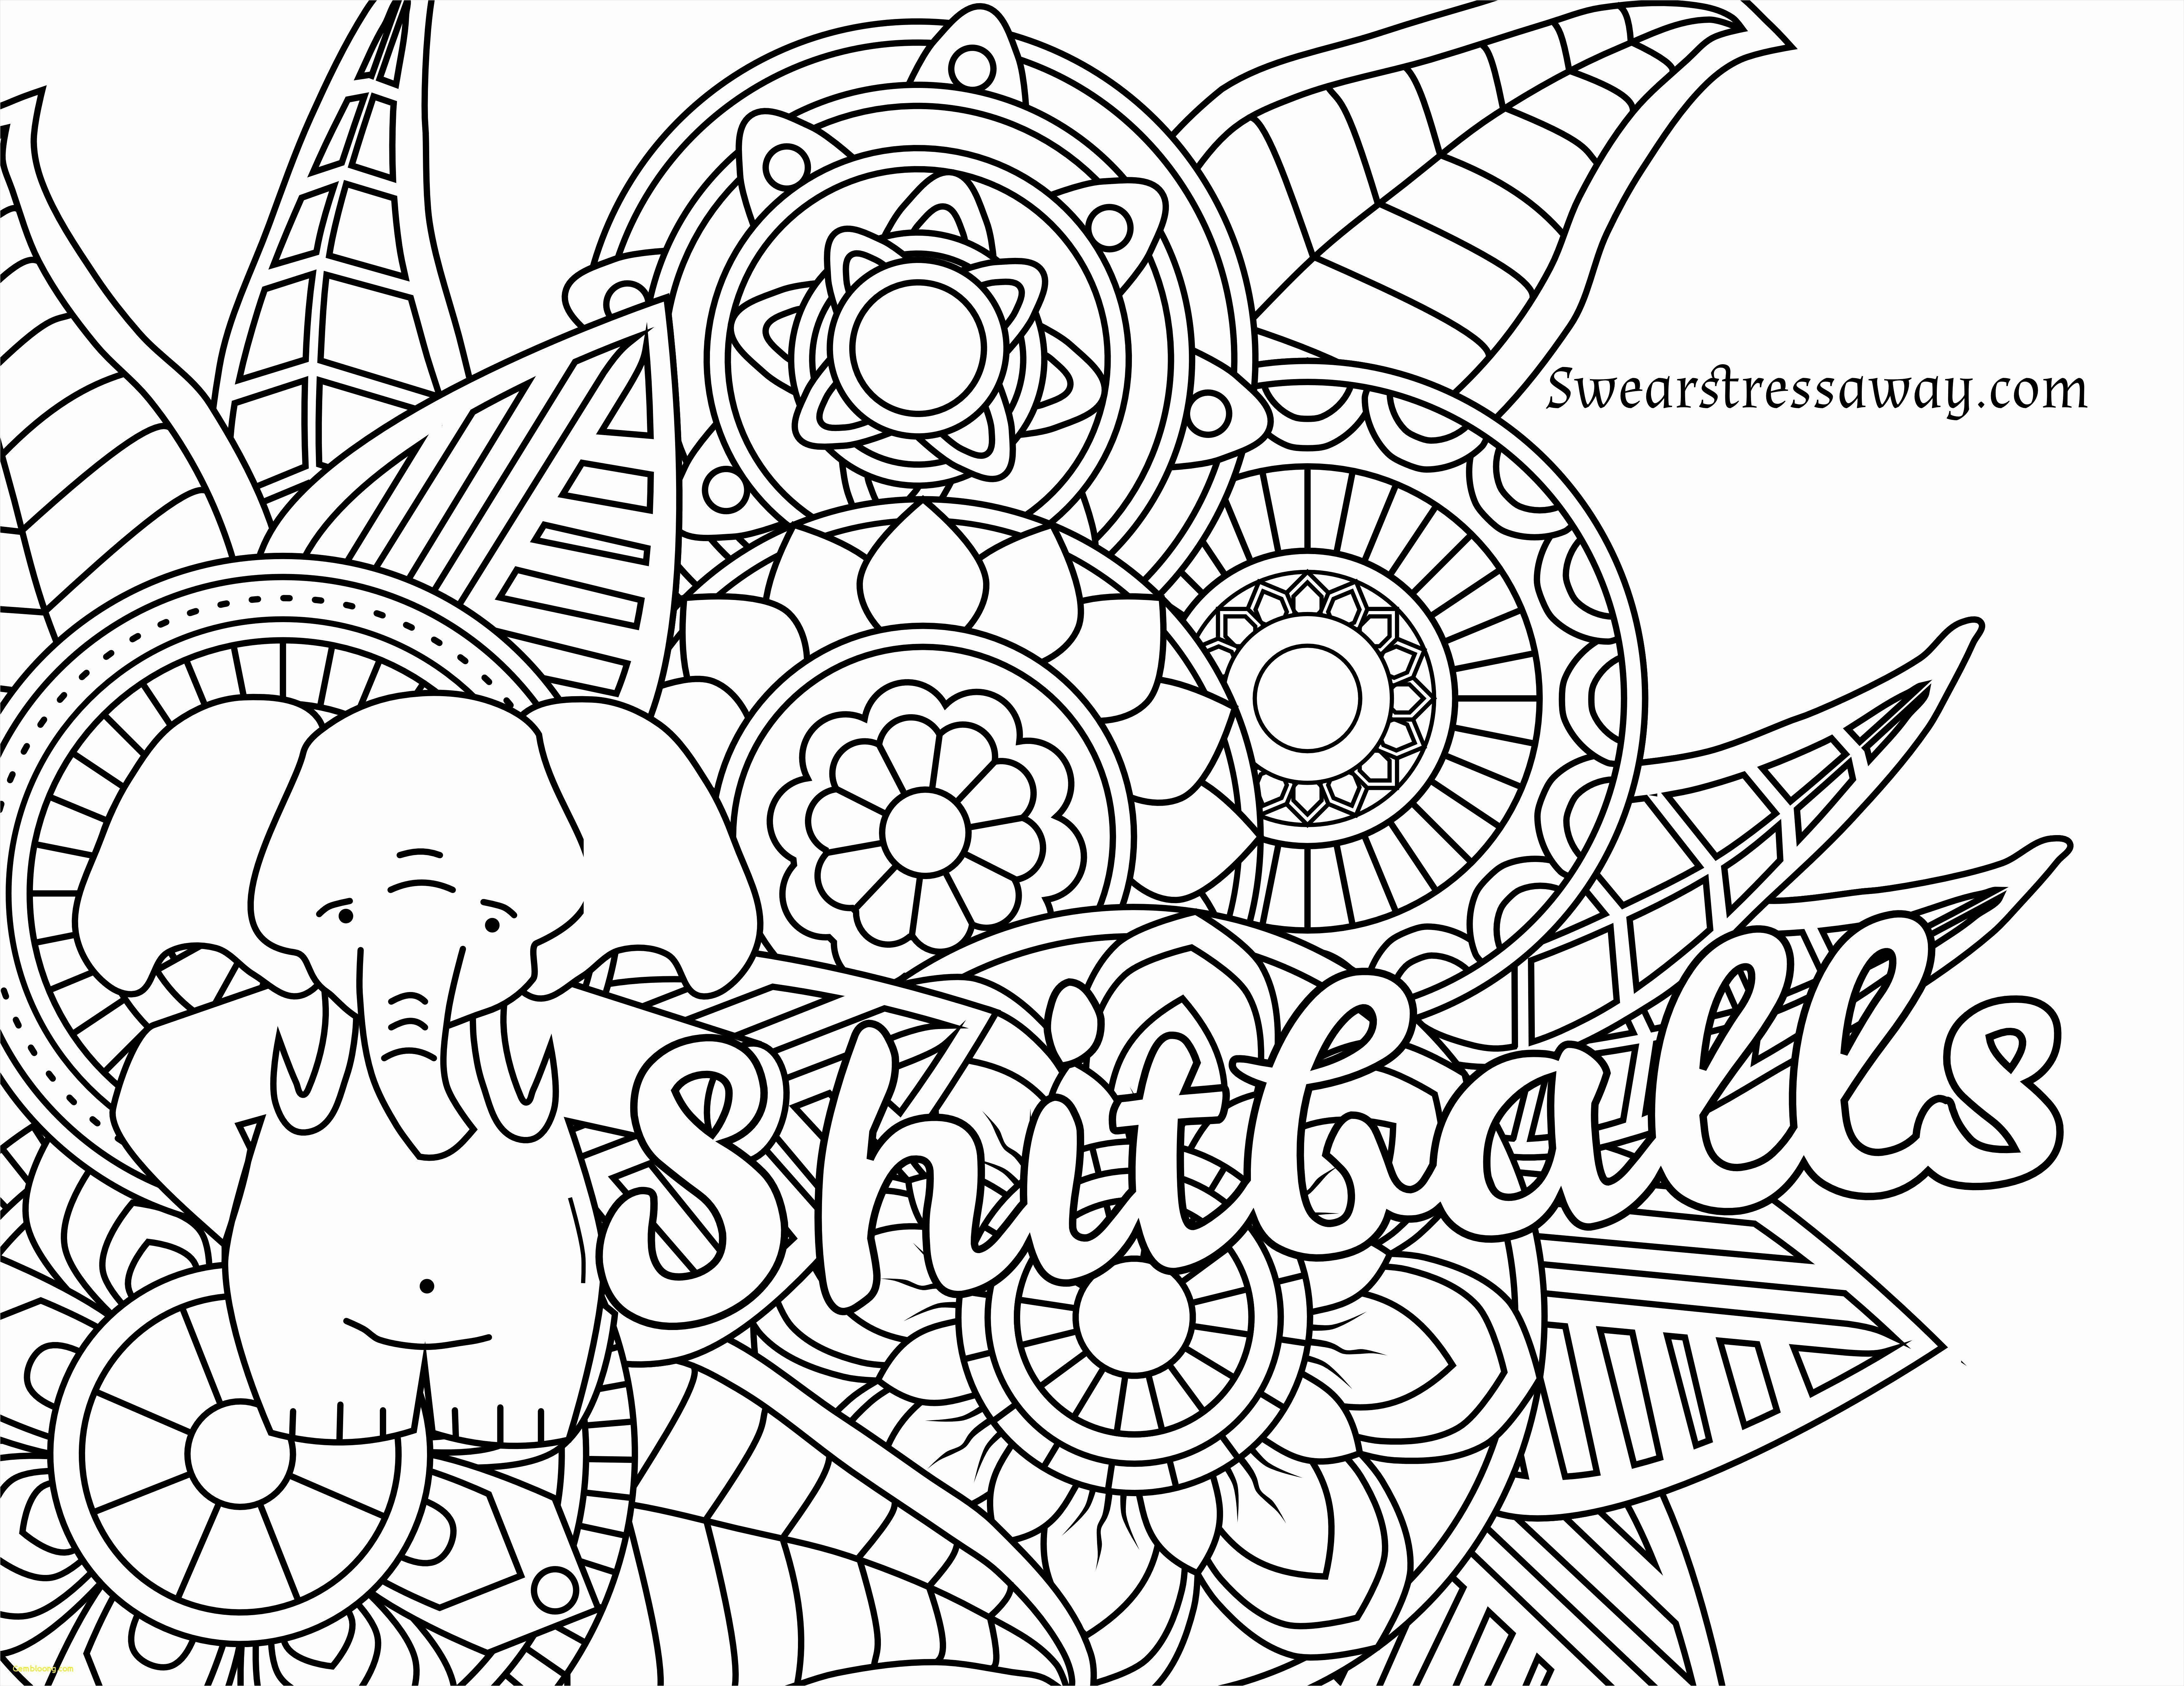 New Adult Coloring Pages Swear Words | Jvzooreview - Free Printable Coloring Pages For Adults Swear Words